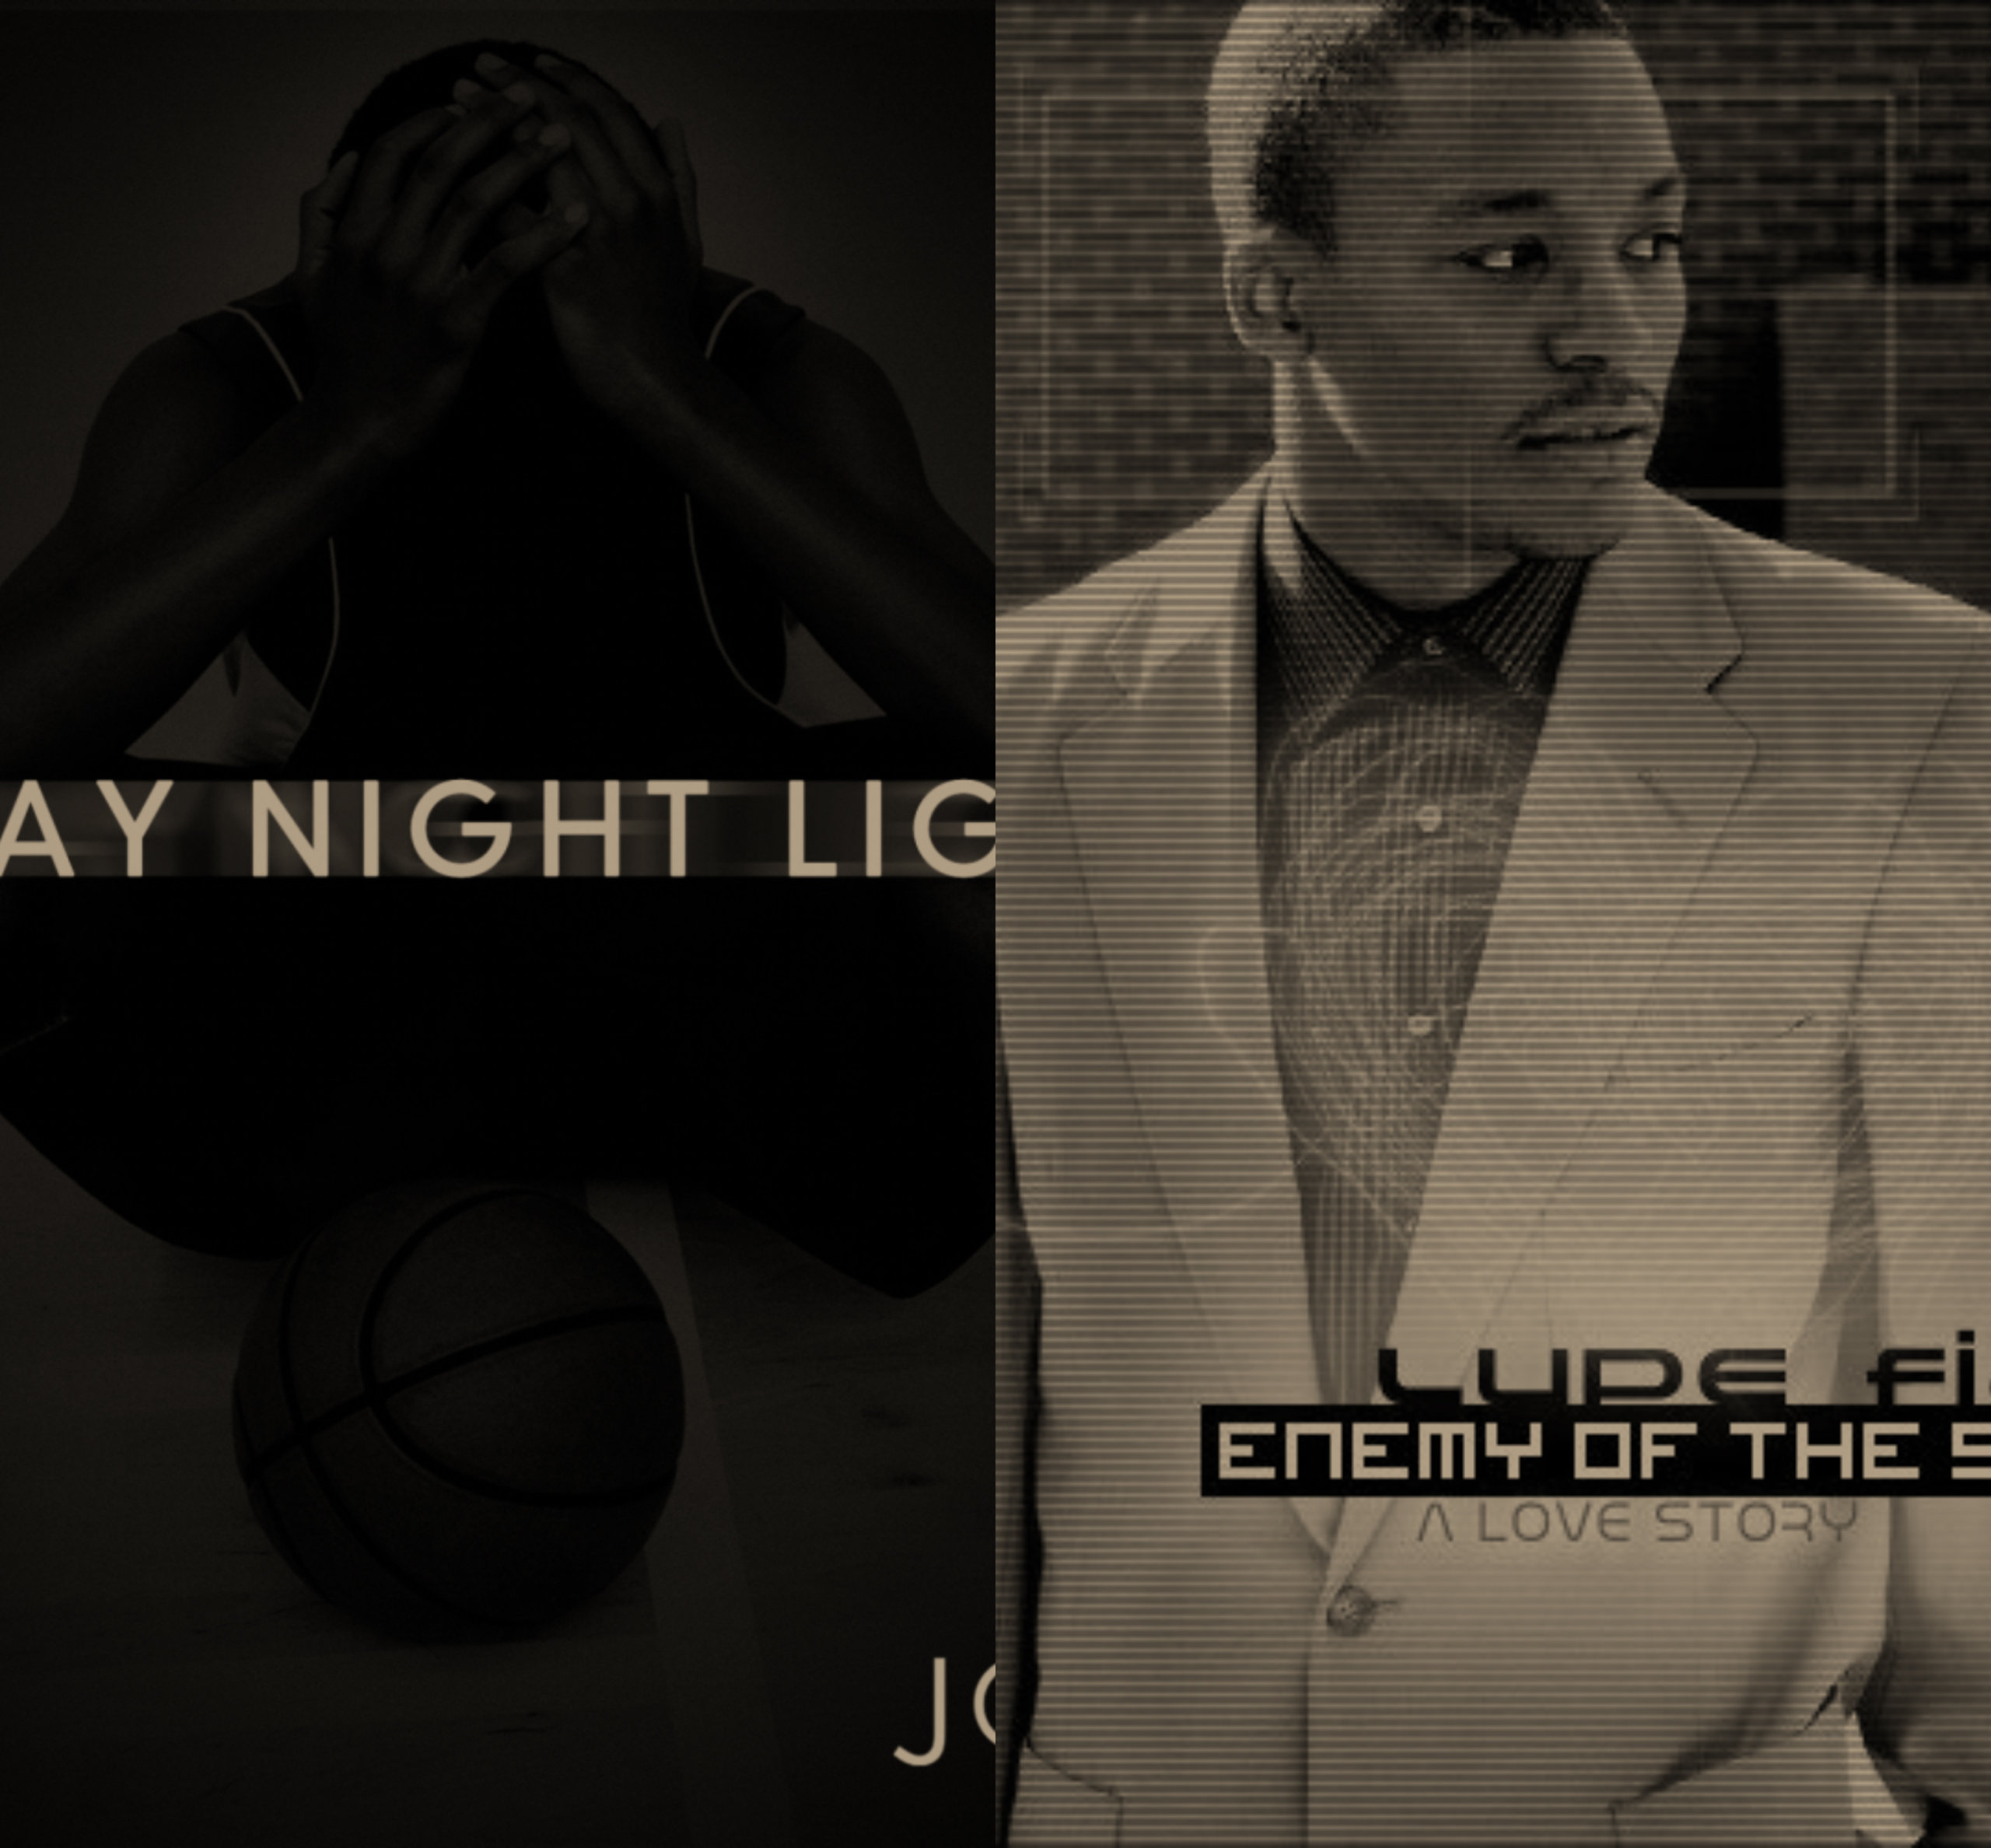 Revisiting J. Cole&amp;#39;s &amp;#39;Friday Night Lights&amp;#39; and Lupe Fiasco&amp;#39;s &amp;#39;Enemy Of ...